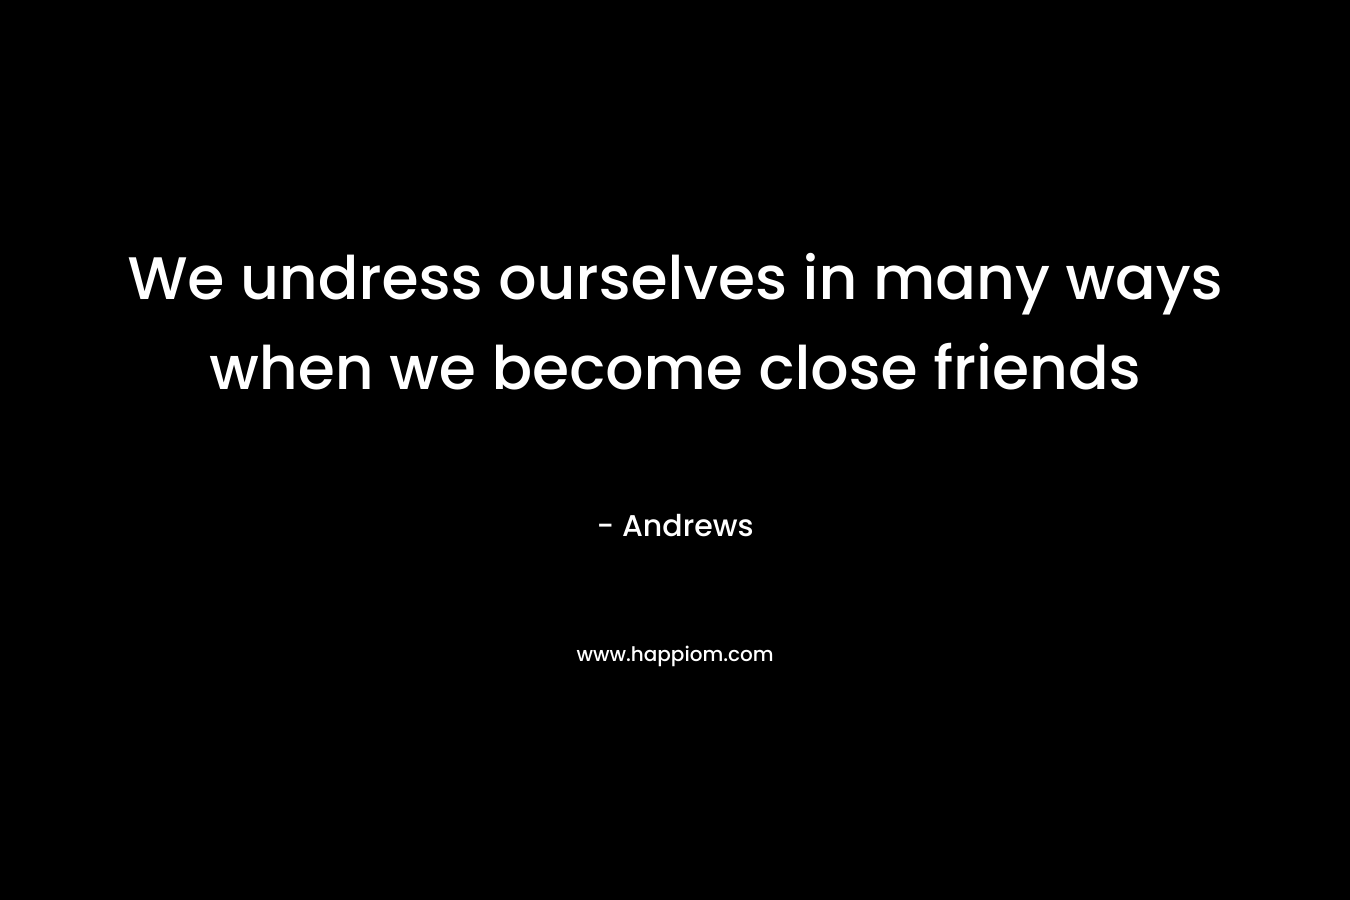 We undress ourselves in many ways when we become close friends – Andrews